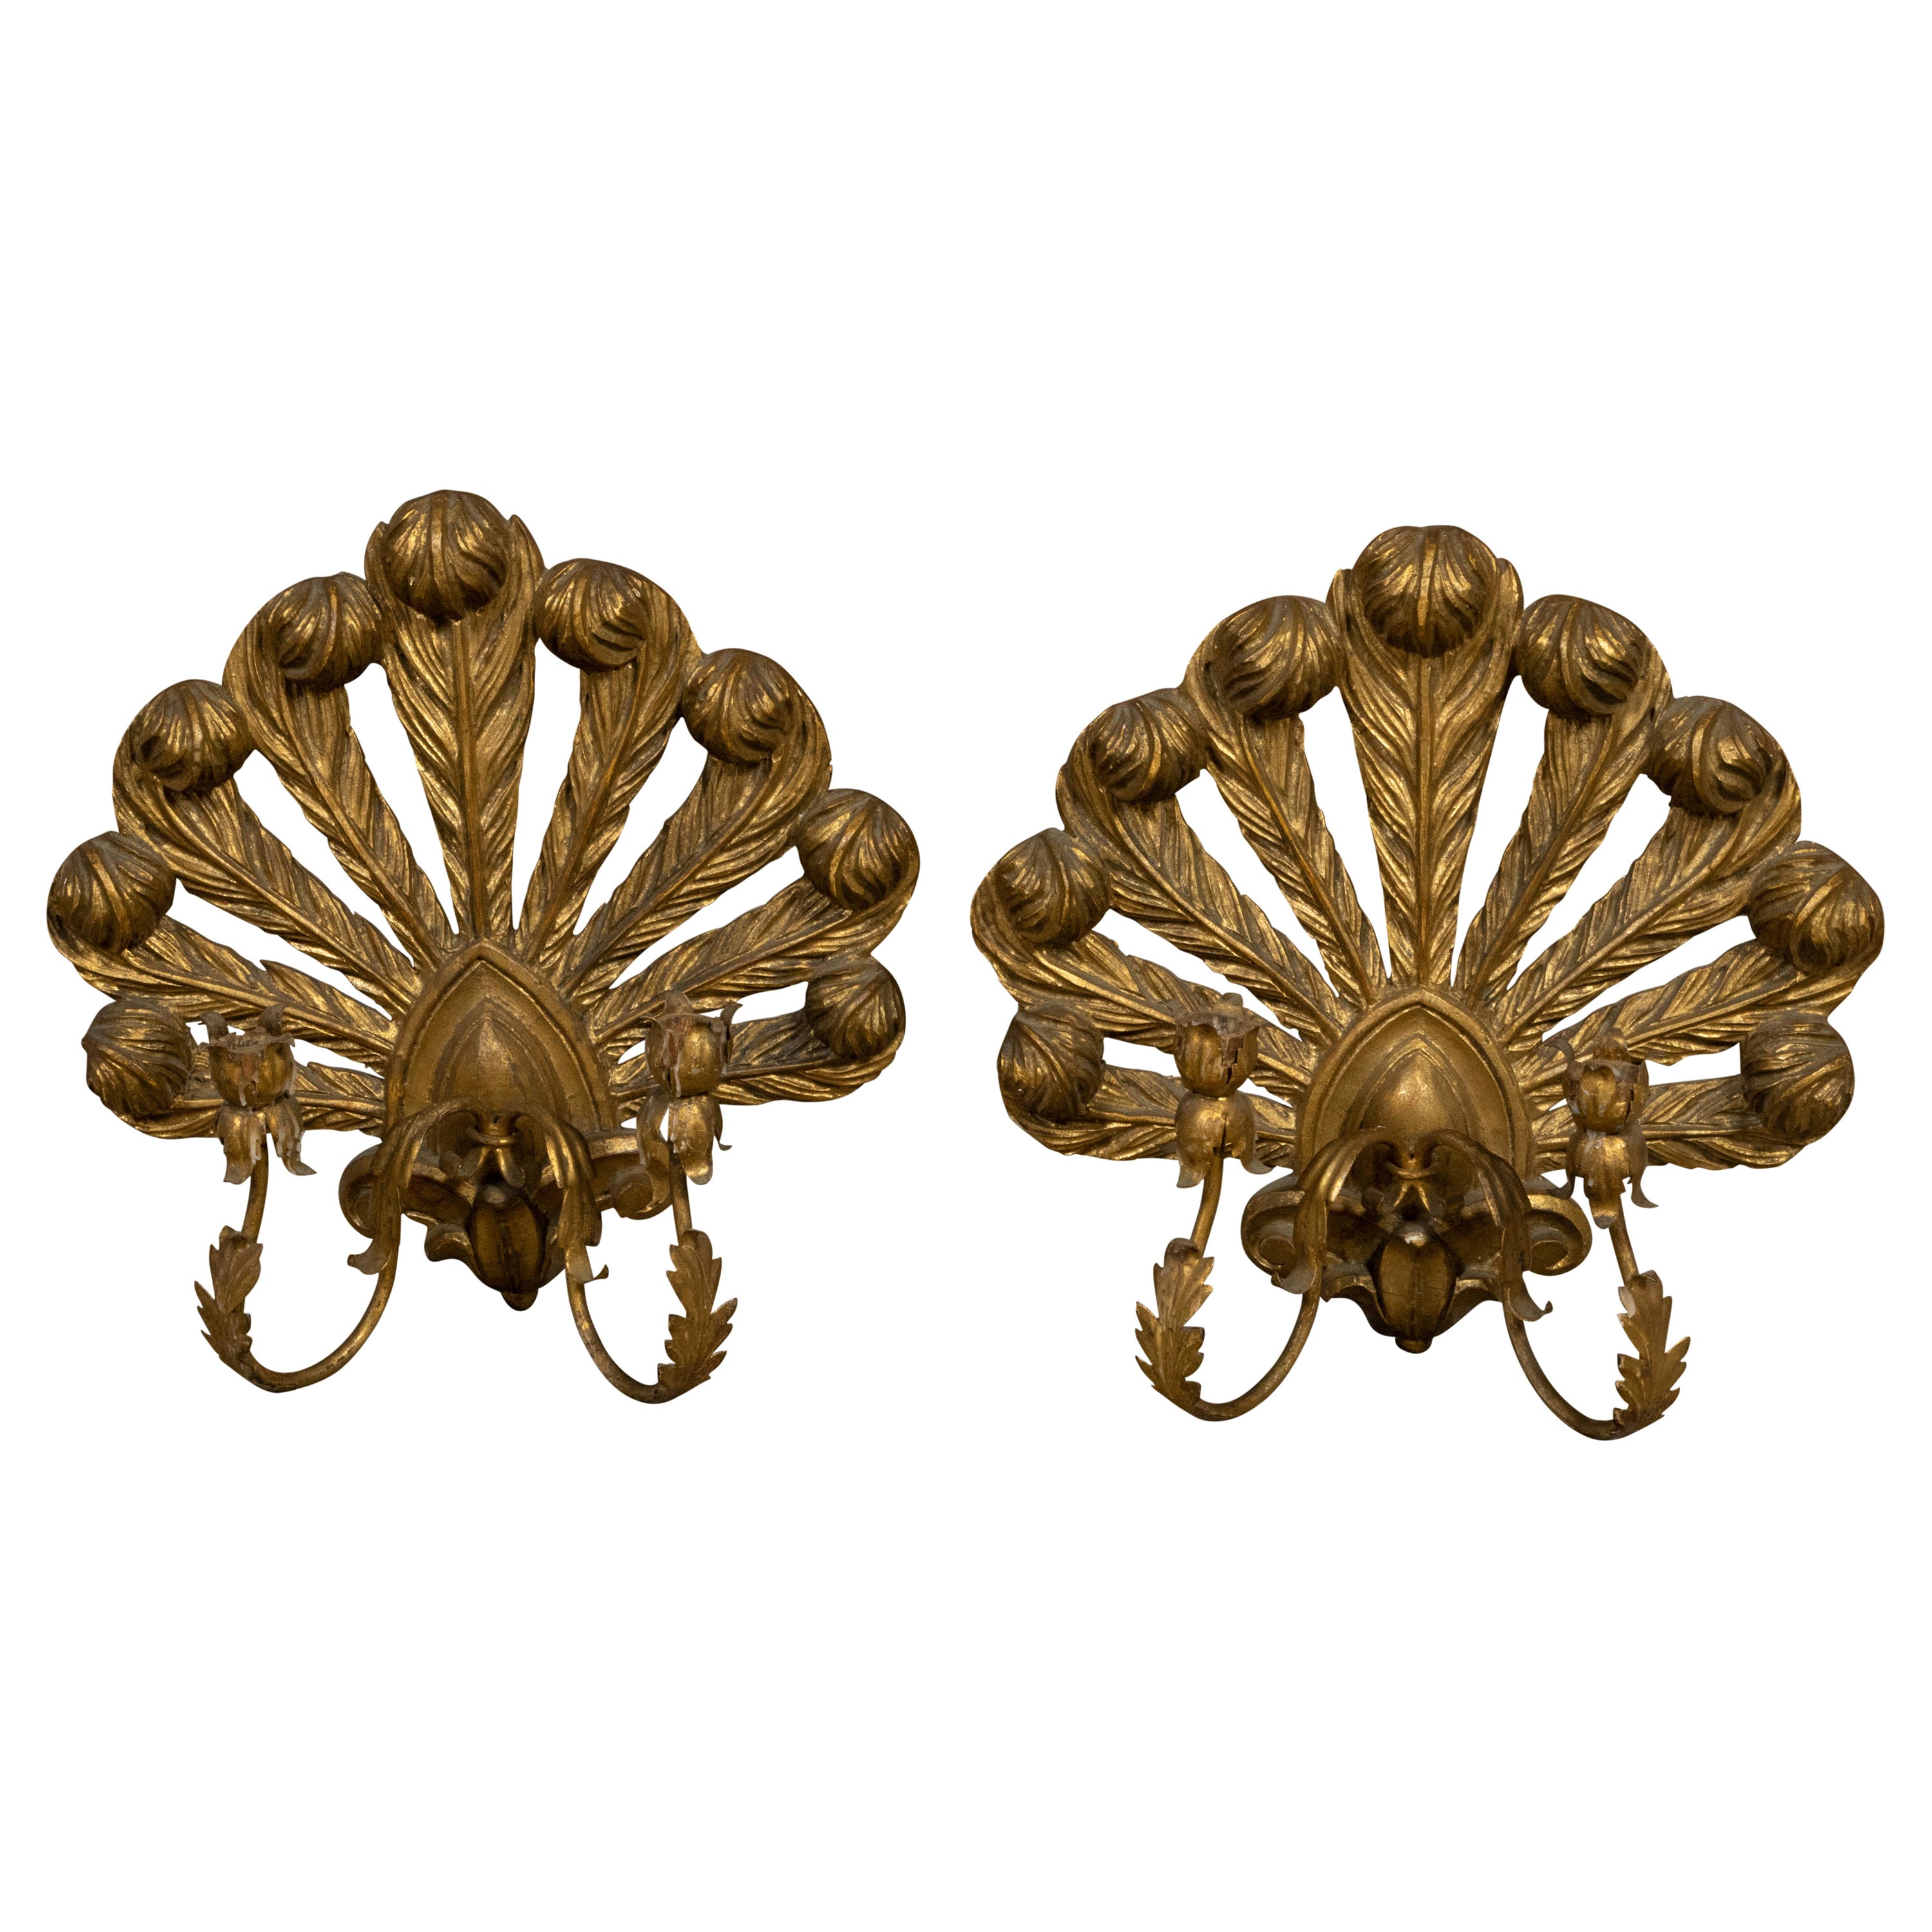 Pair of Italian Midcentury Giltwood Candle Sconces with Carved Feathers For Sale